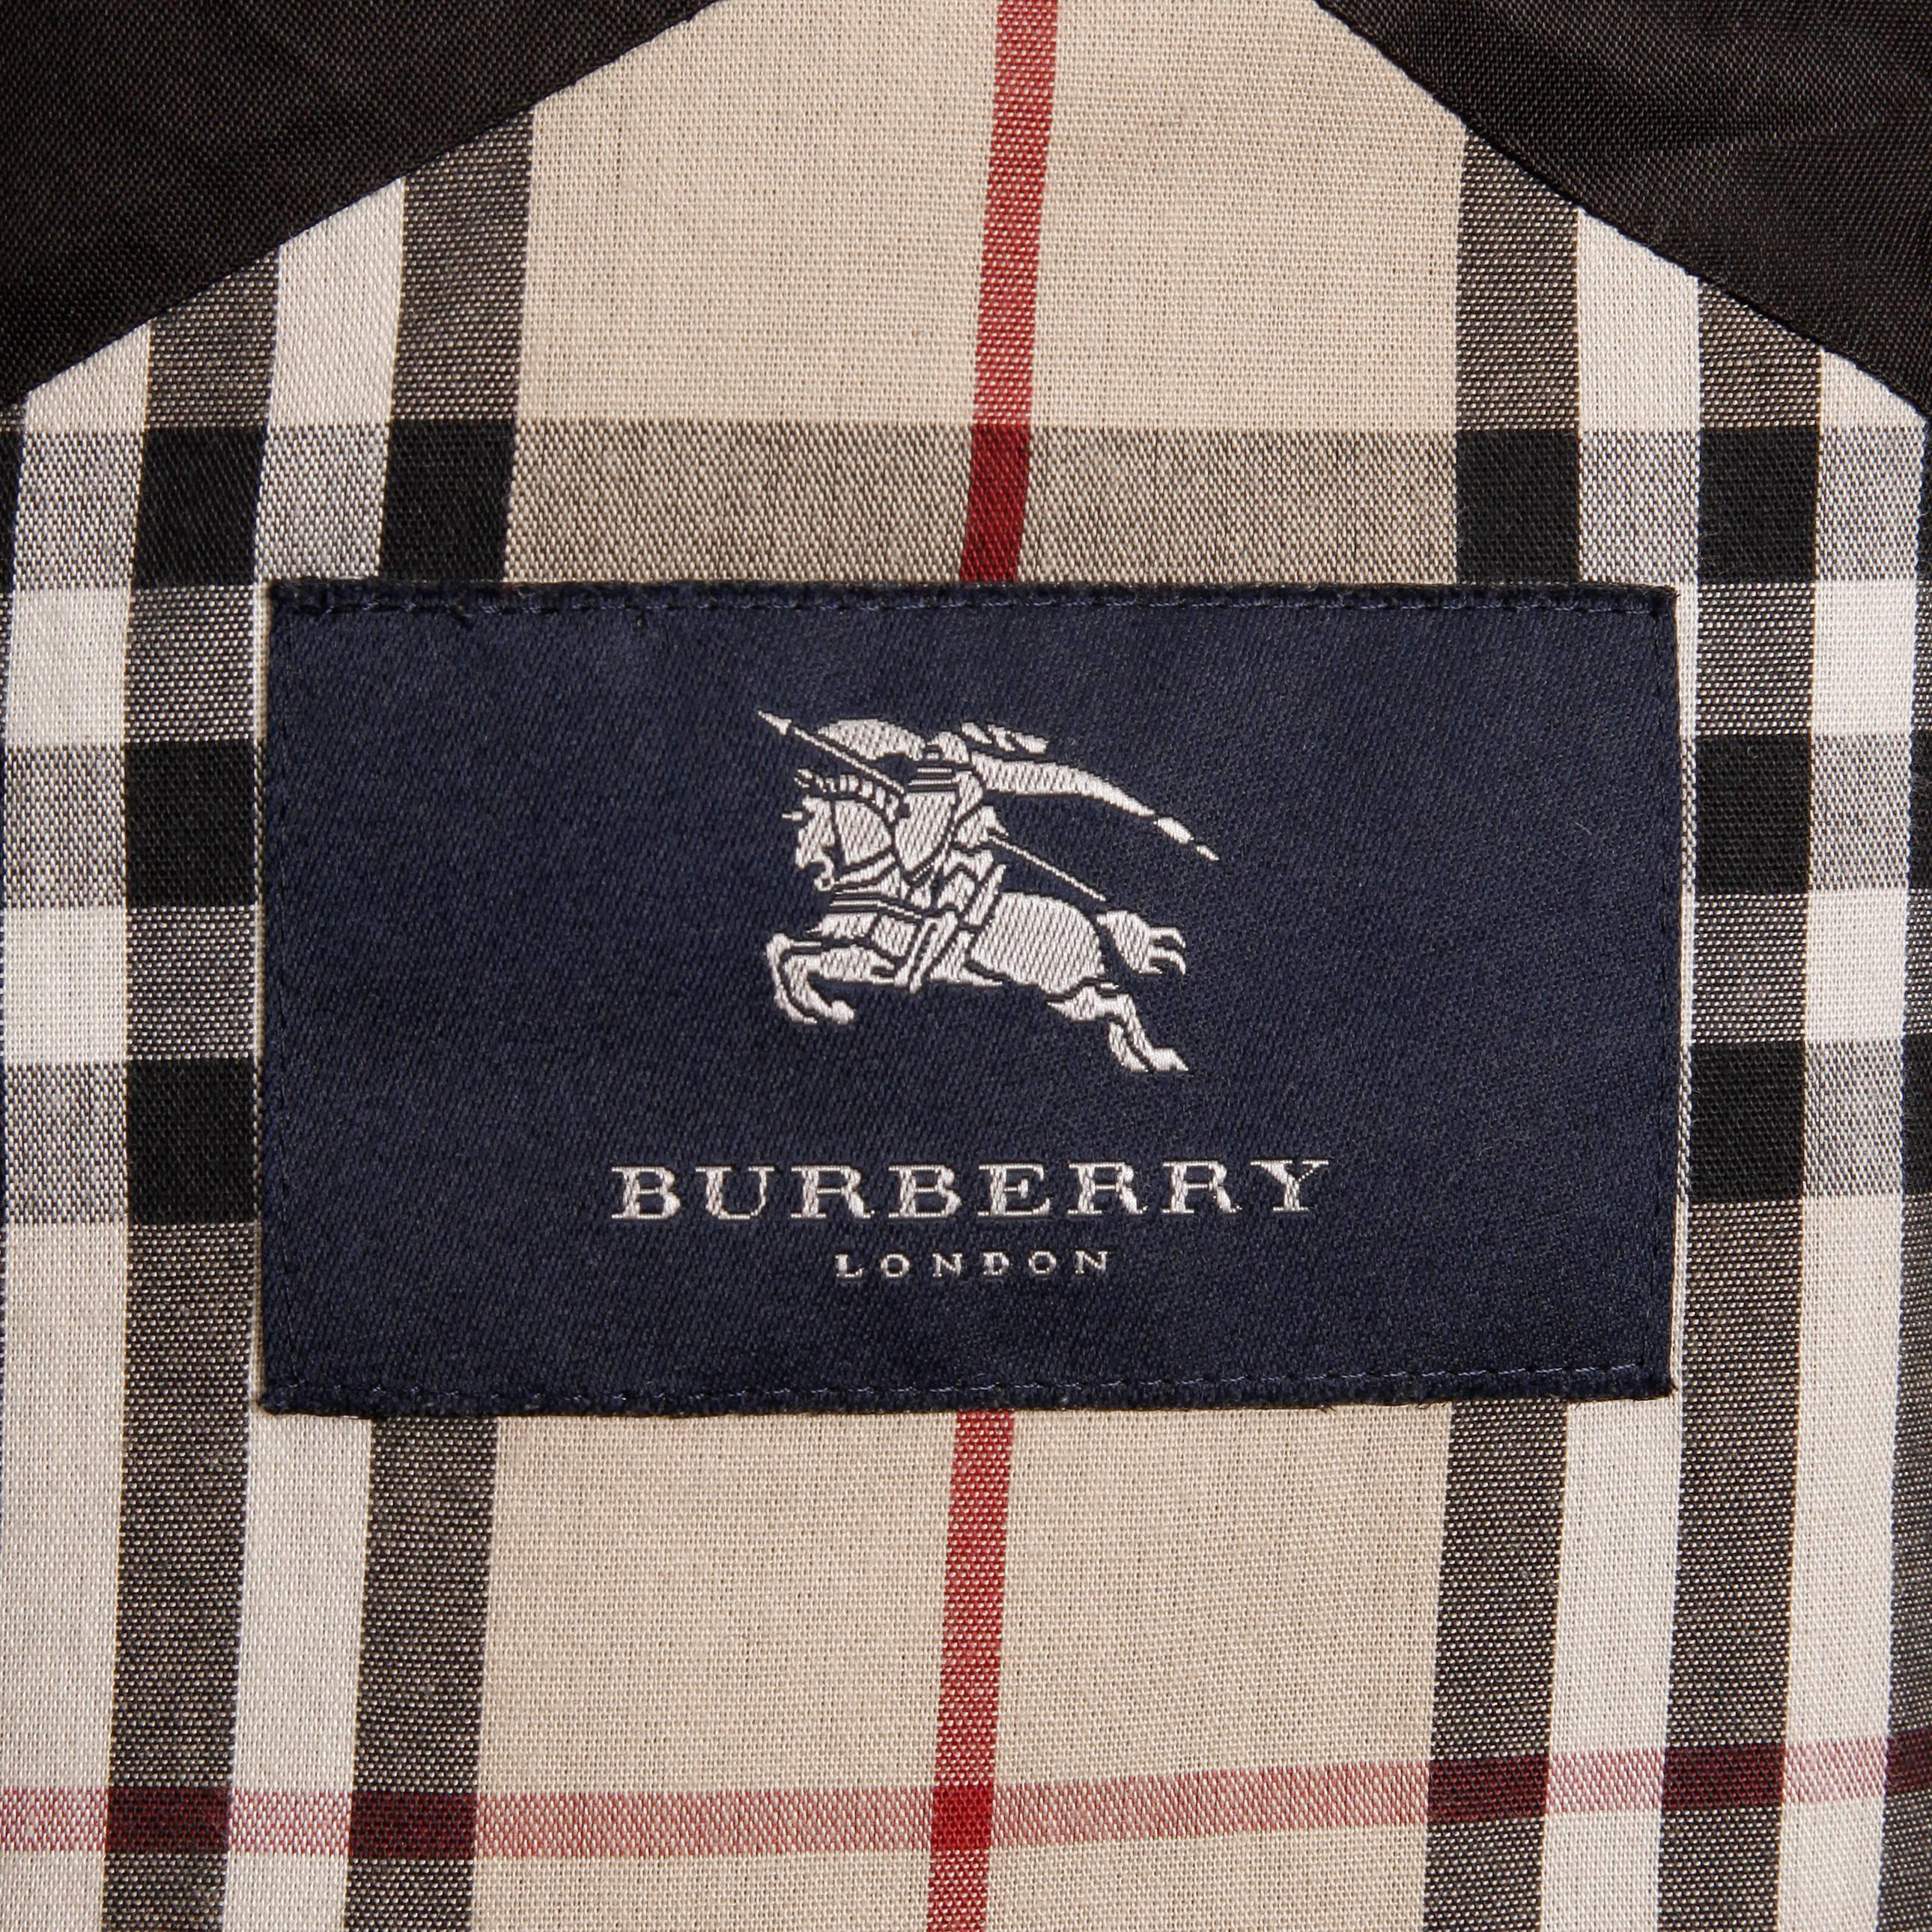 Classic Burberry raincoat with nova plaid trim and a detachable hood. Fully lined with front zip and snap closure. Hidden pockets. Removable hood with drawstring. Exterior is 100% polyester with rubber backing, lining 50% cotton, 50% polyester.